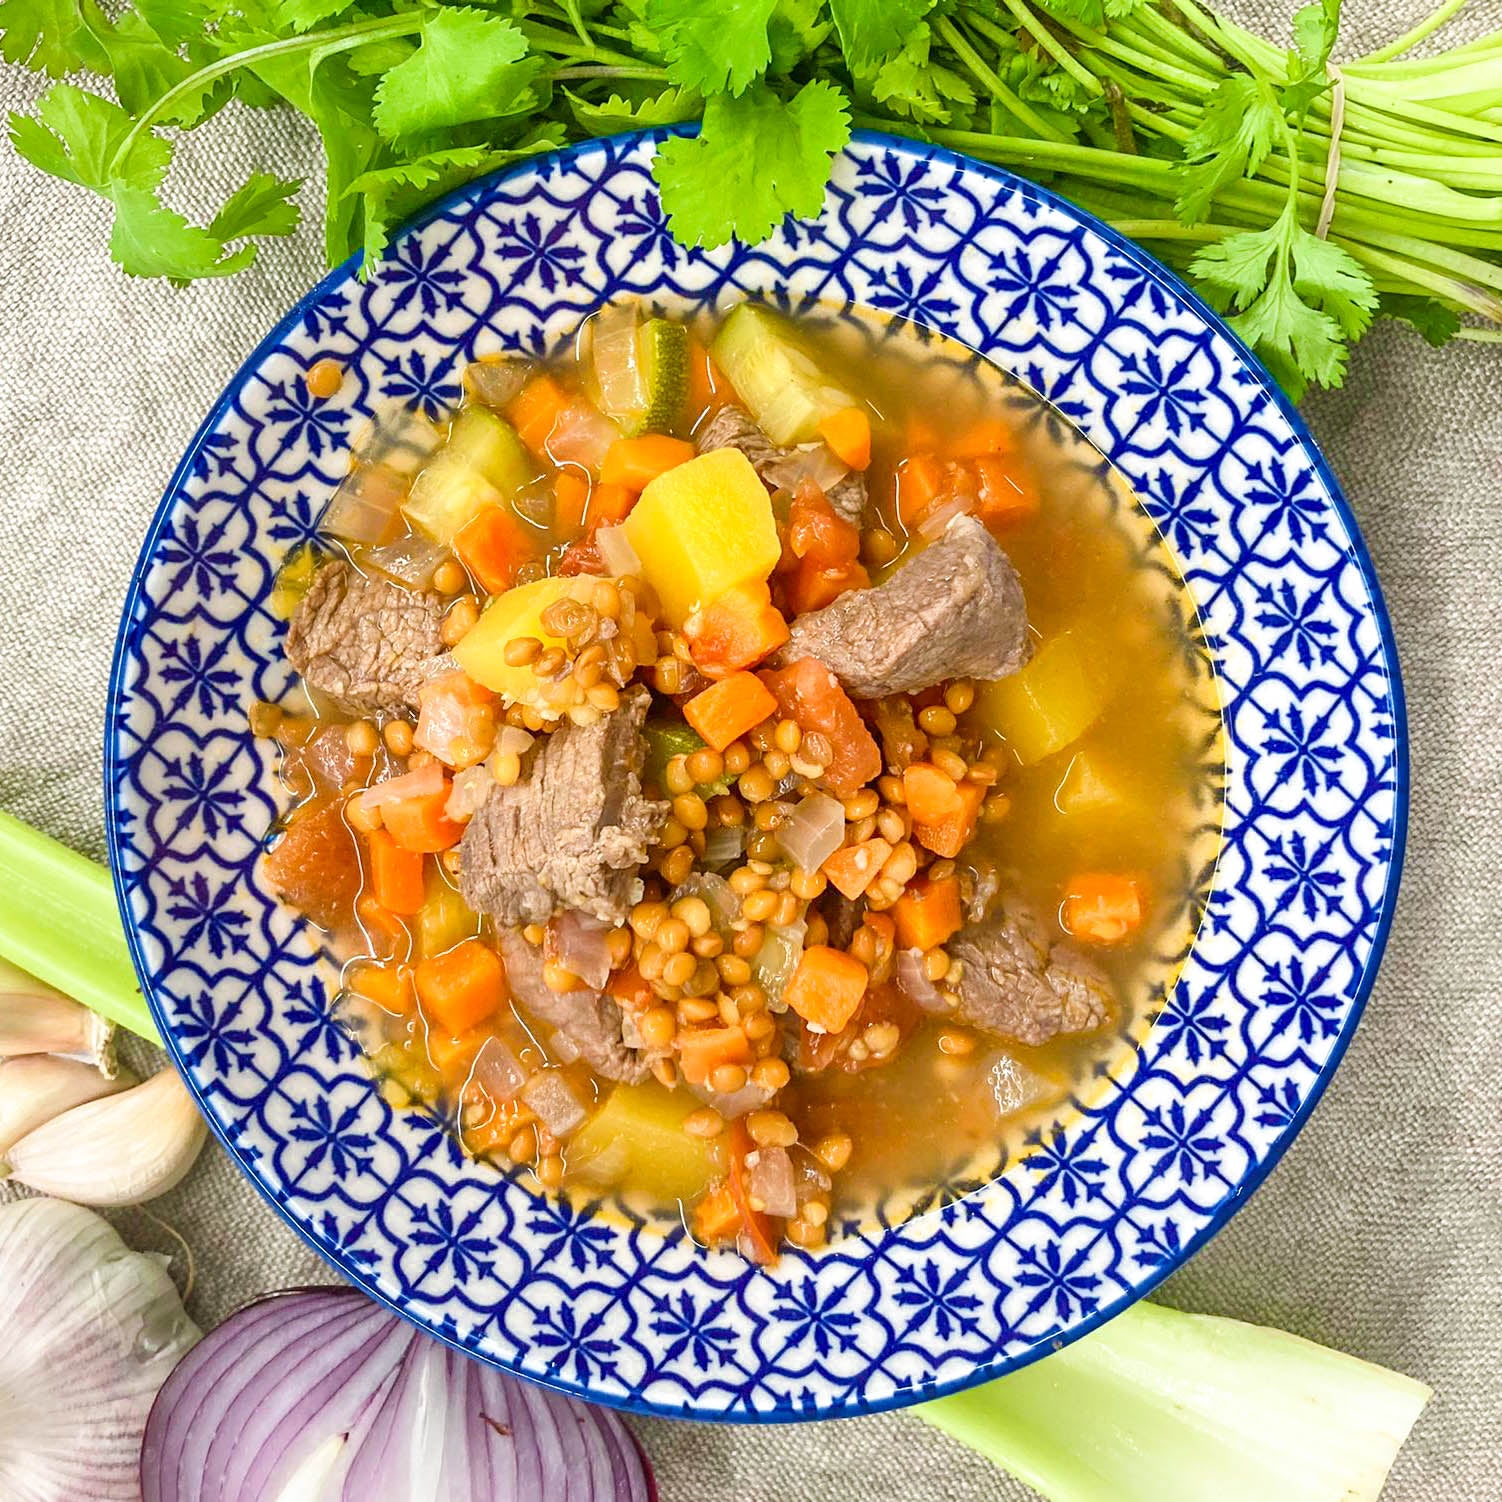 Beef and lentils stew